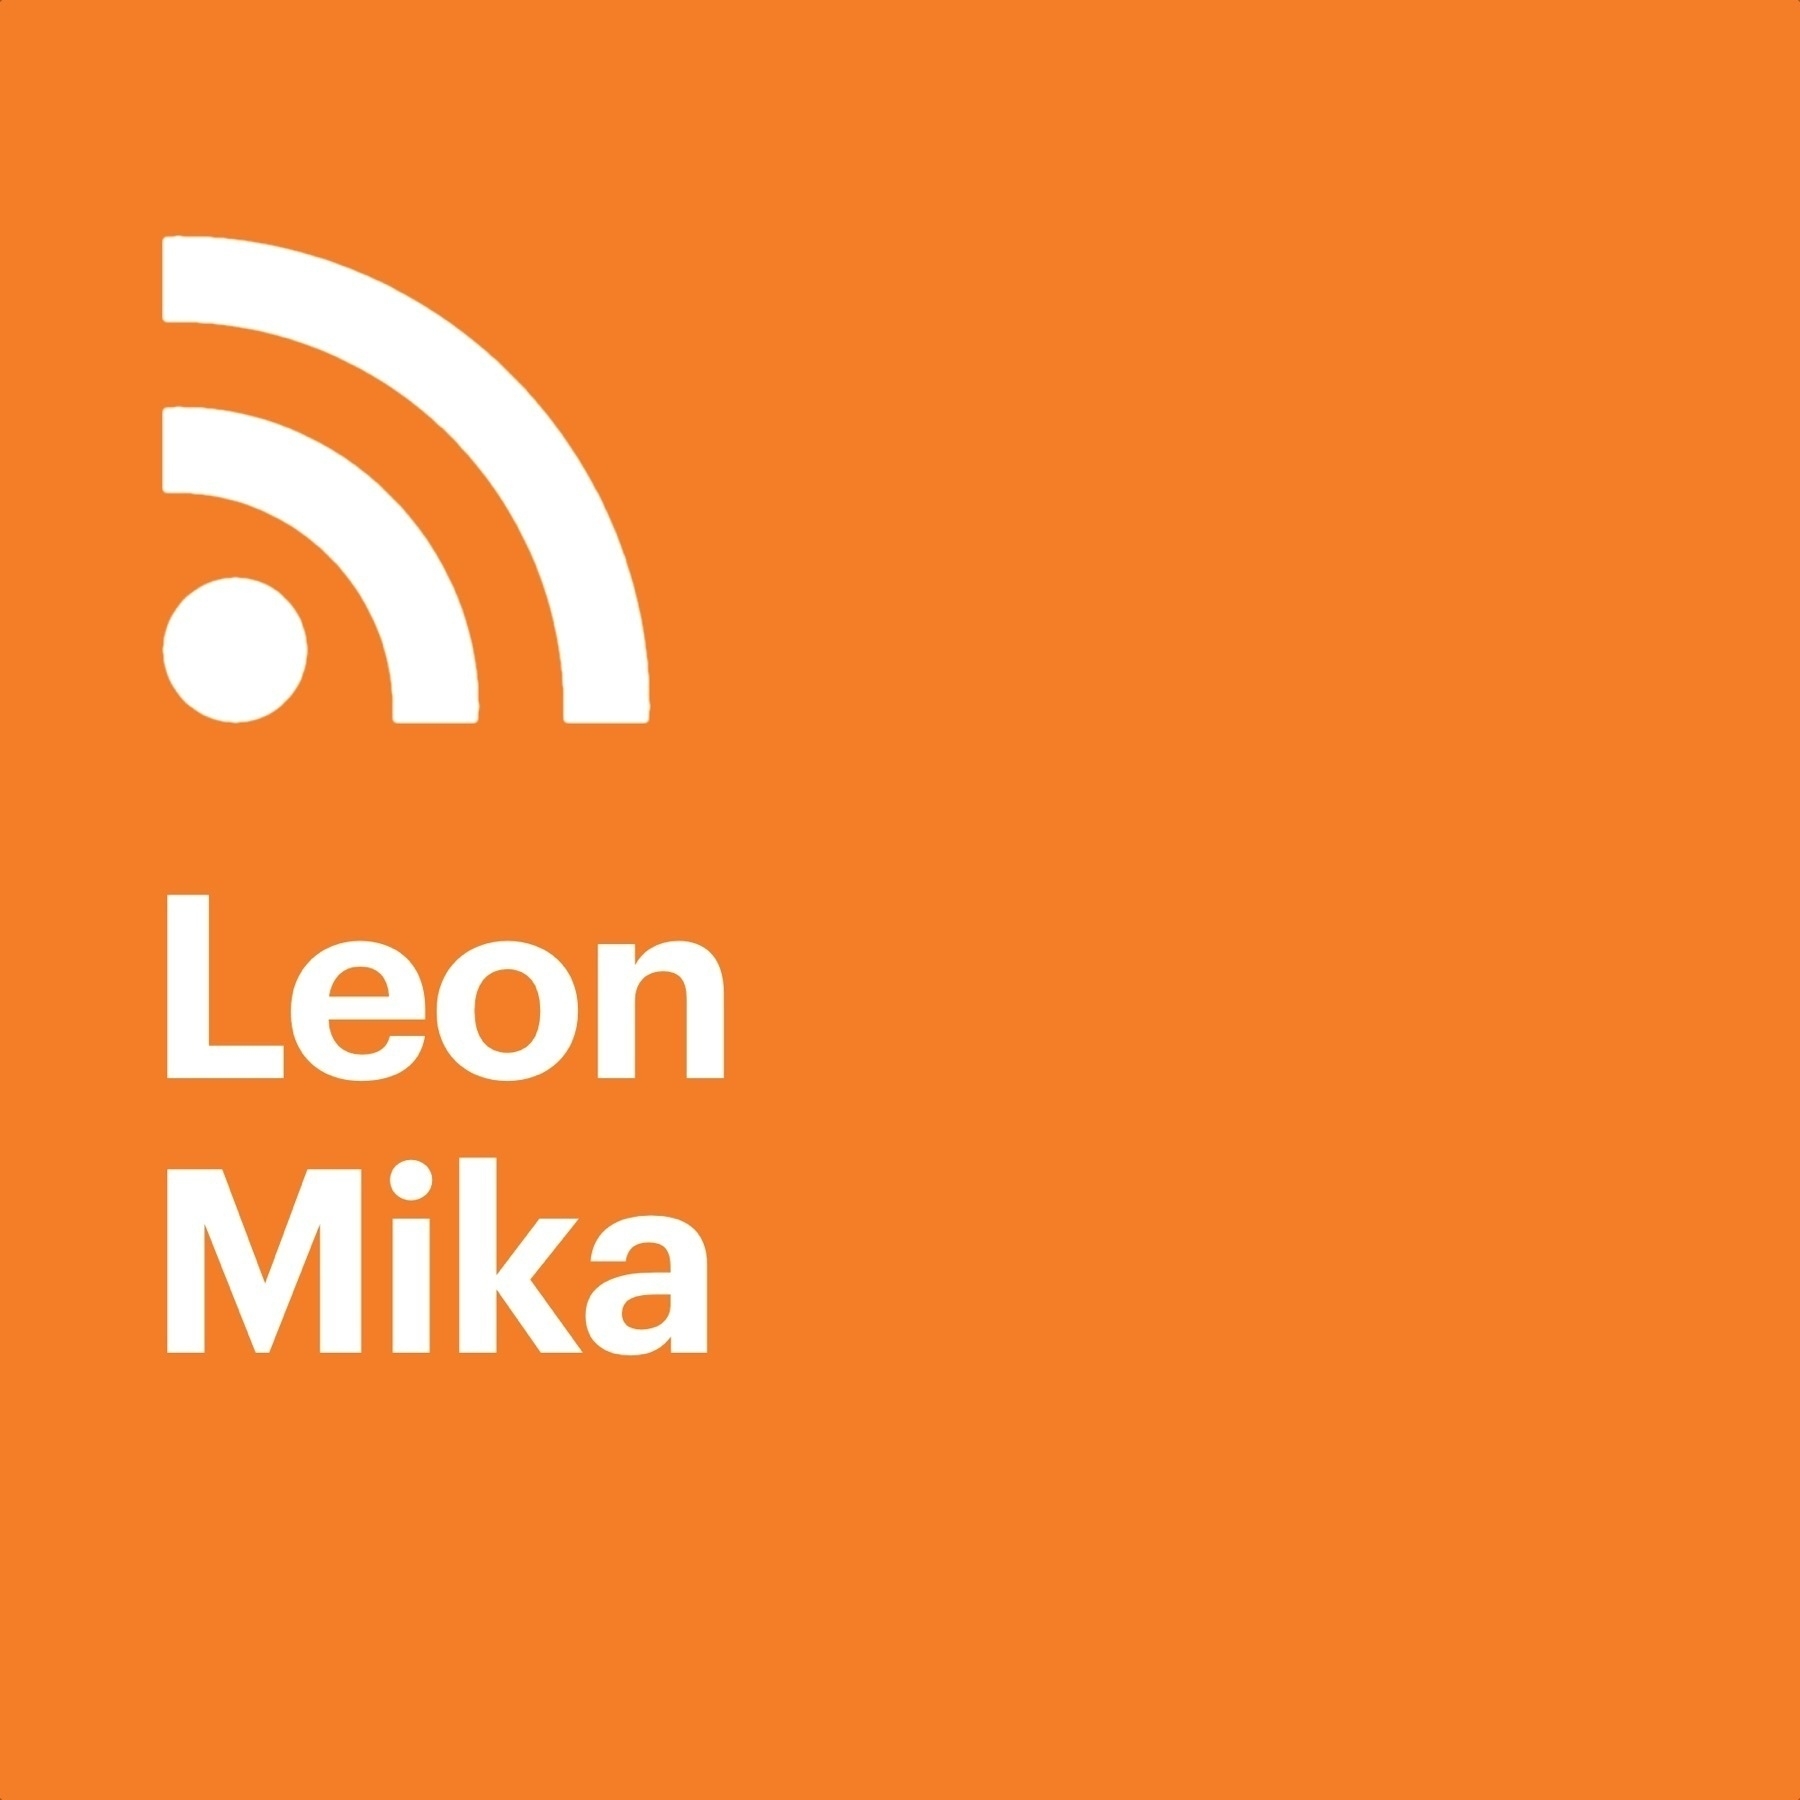 Orange-and-white podcast artwork with an RSS icon and the name Leon Mika underneath it